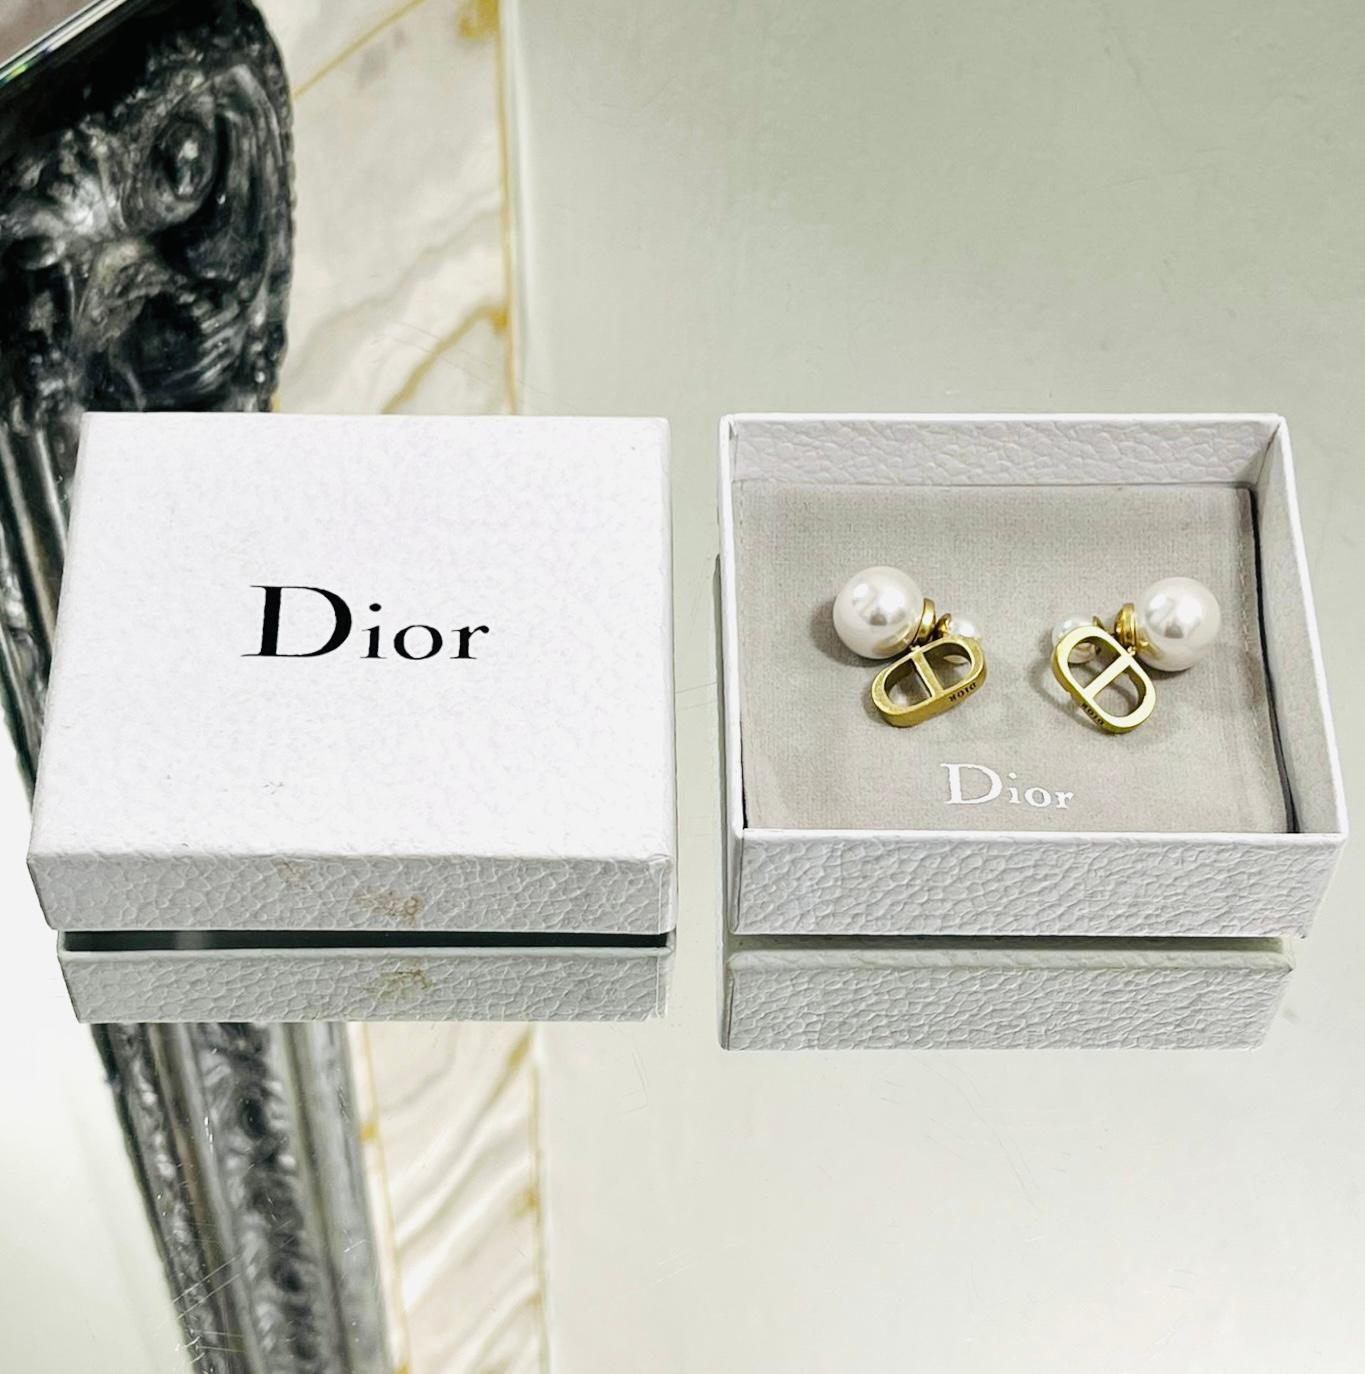 Dior Tribales 'CD' Logo White Resin Pearl Earrings

Antique gold clip-on earrings designed in 'CD' signature shape.

Featuring white resin pearl base and tiny pearl detailing to rear.

Styled with 'Dior' engravement to the metal parts. Rrp